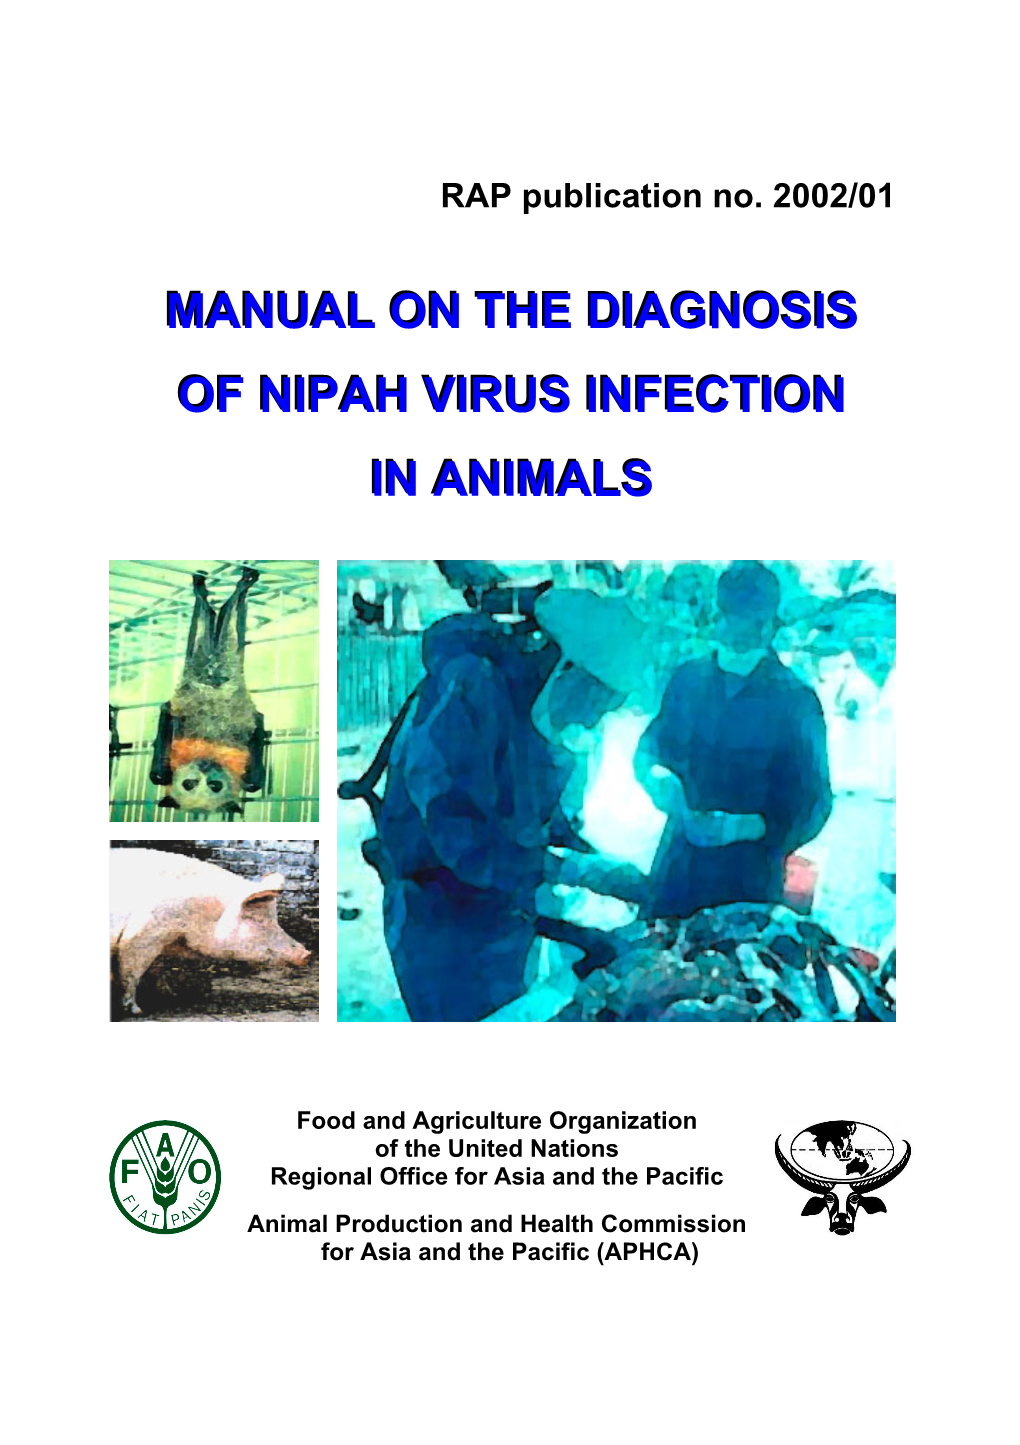 Manual on the Diagnosis of Nipah Virus Infection in Animals